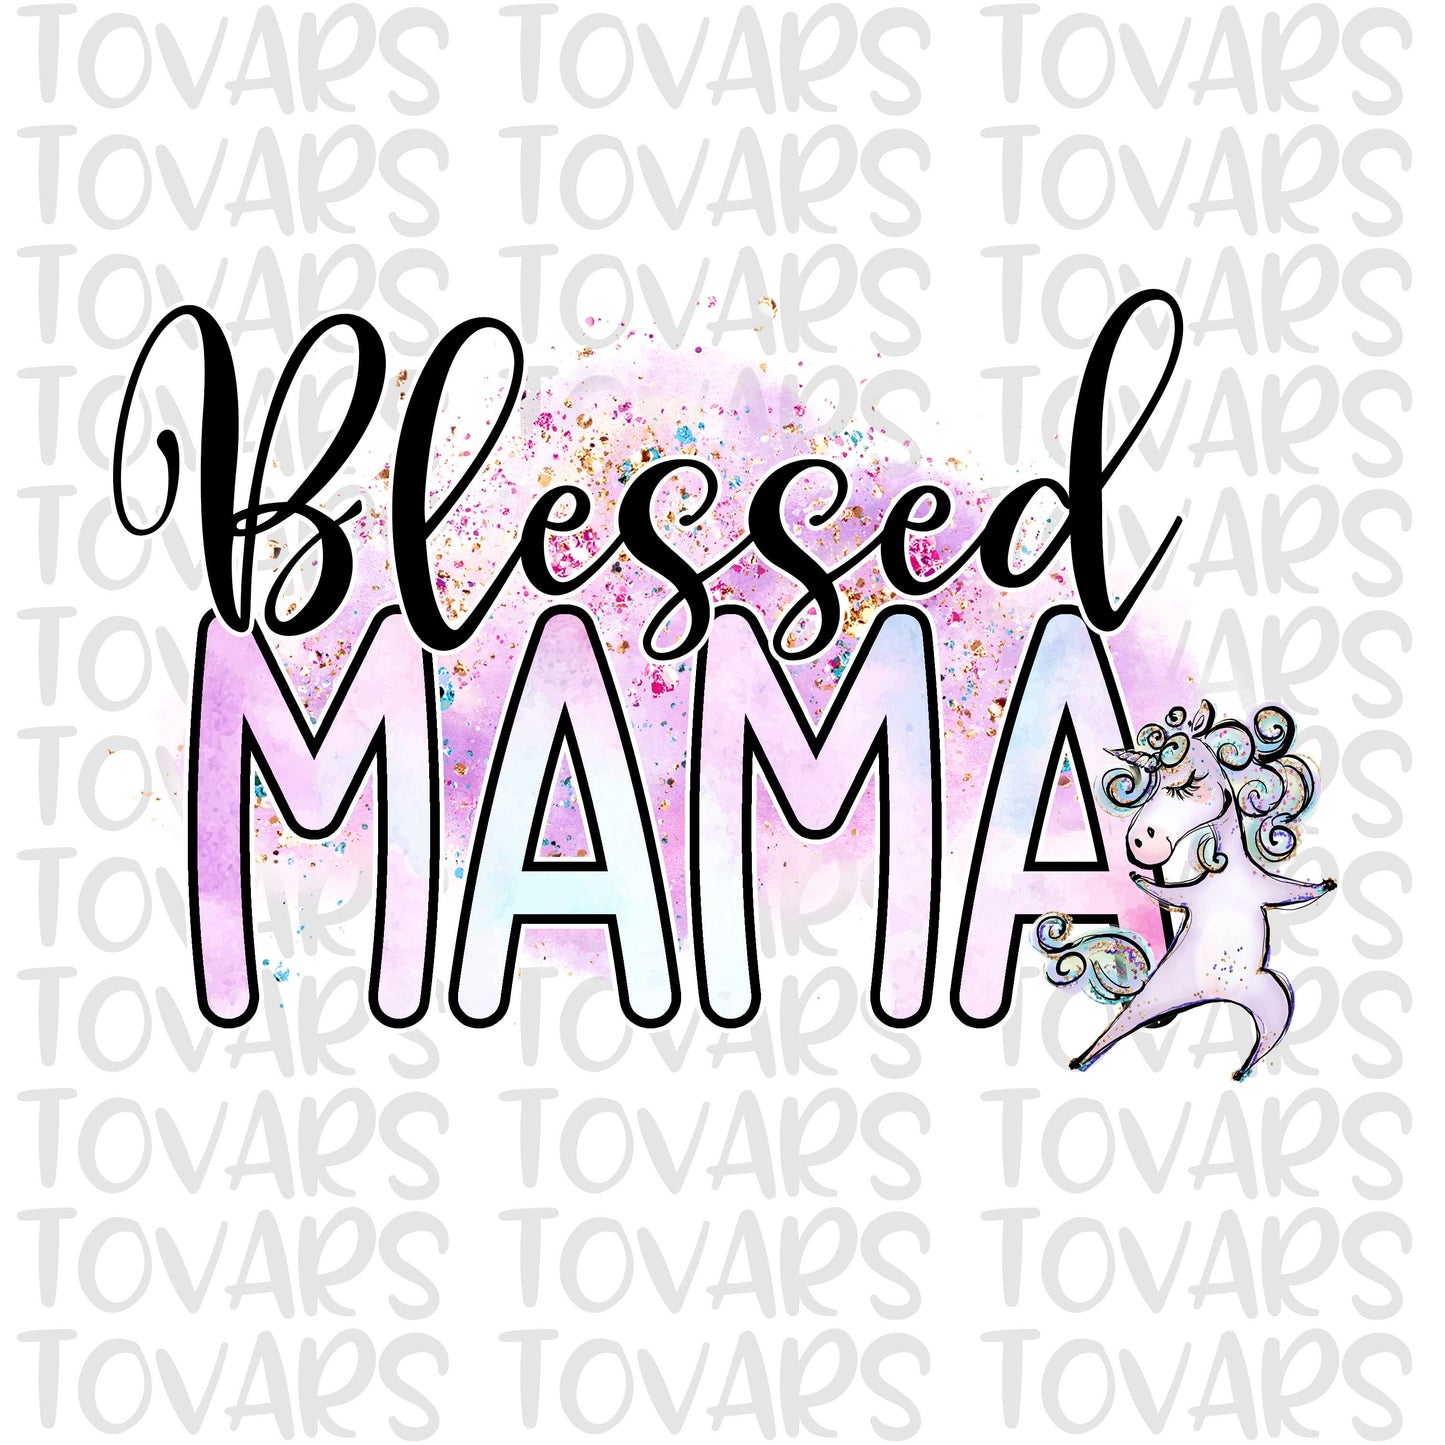 Blessed Mama Unicorn Sublimation Download, Unicorn PNG File Instant Download Sublimation Download, Unicorn Design watercolor unicorn unicorn